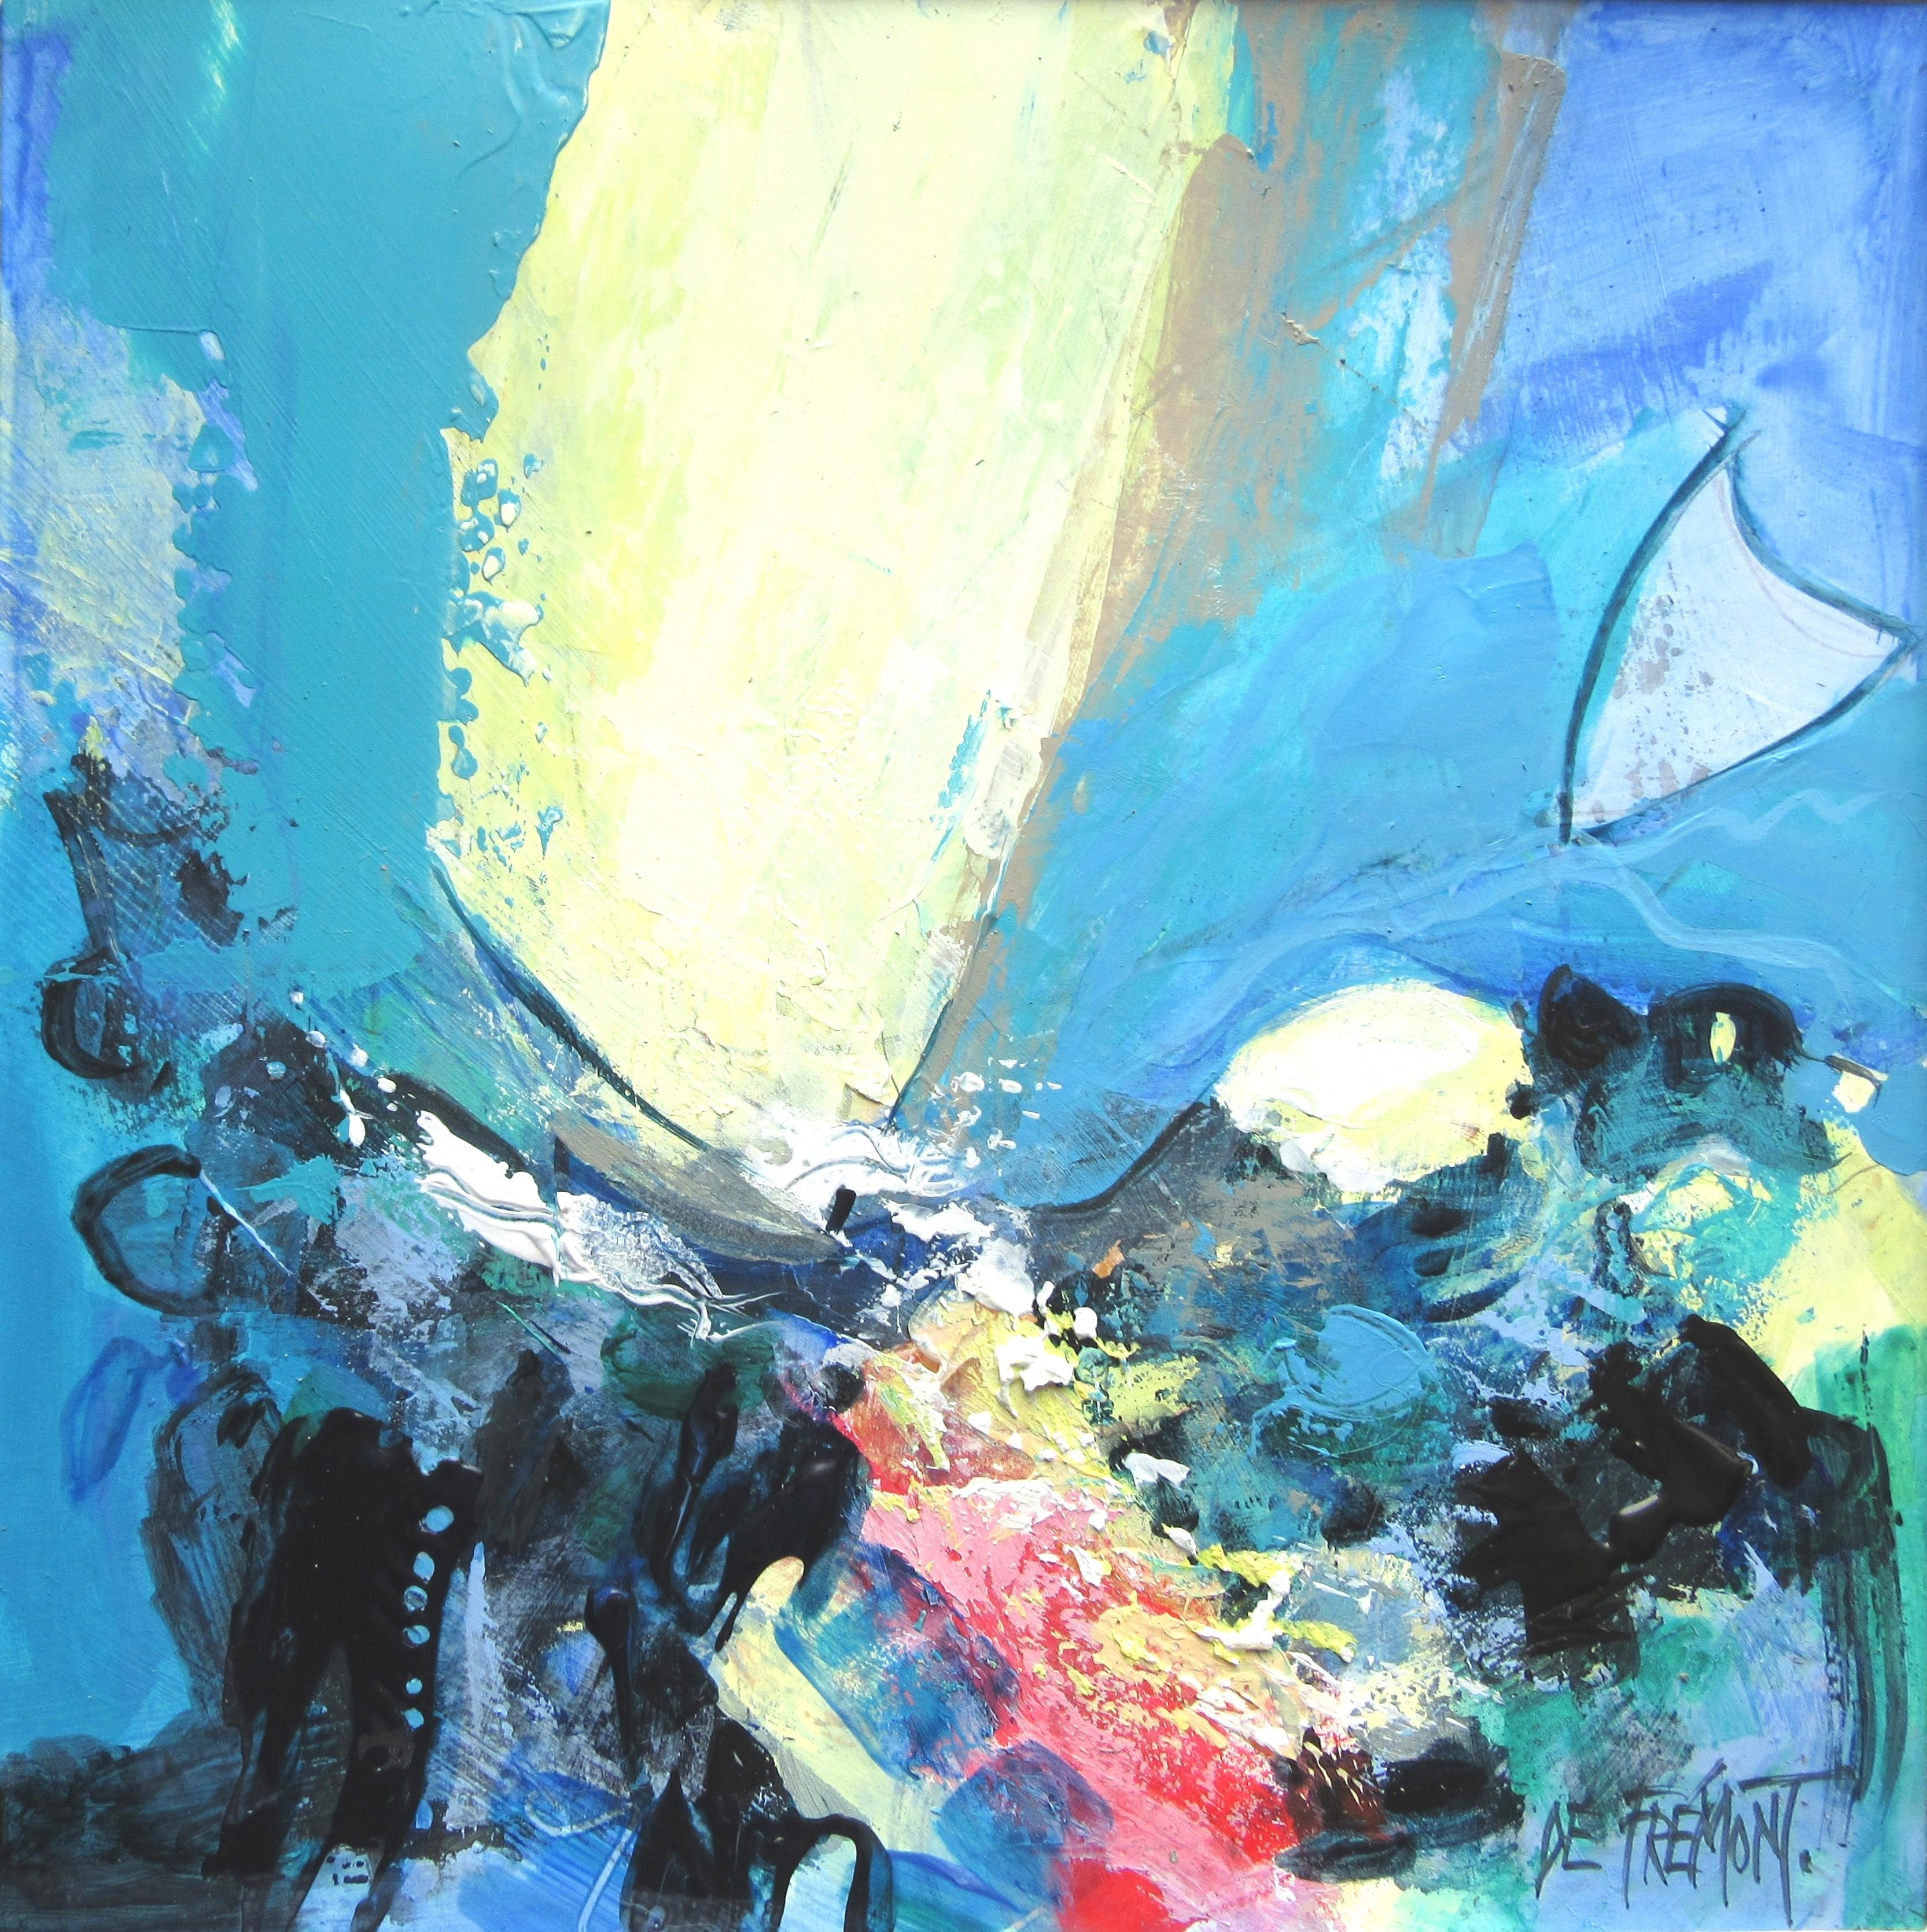 "Sun on the Sea", Large Colourful Squared Marine Landscape Mixed Media Art Painting